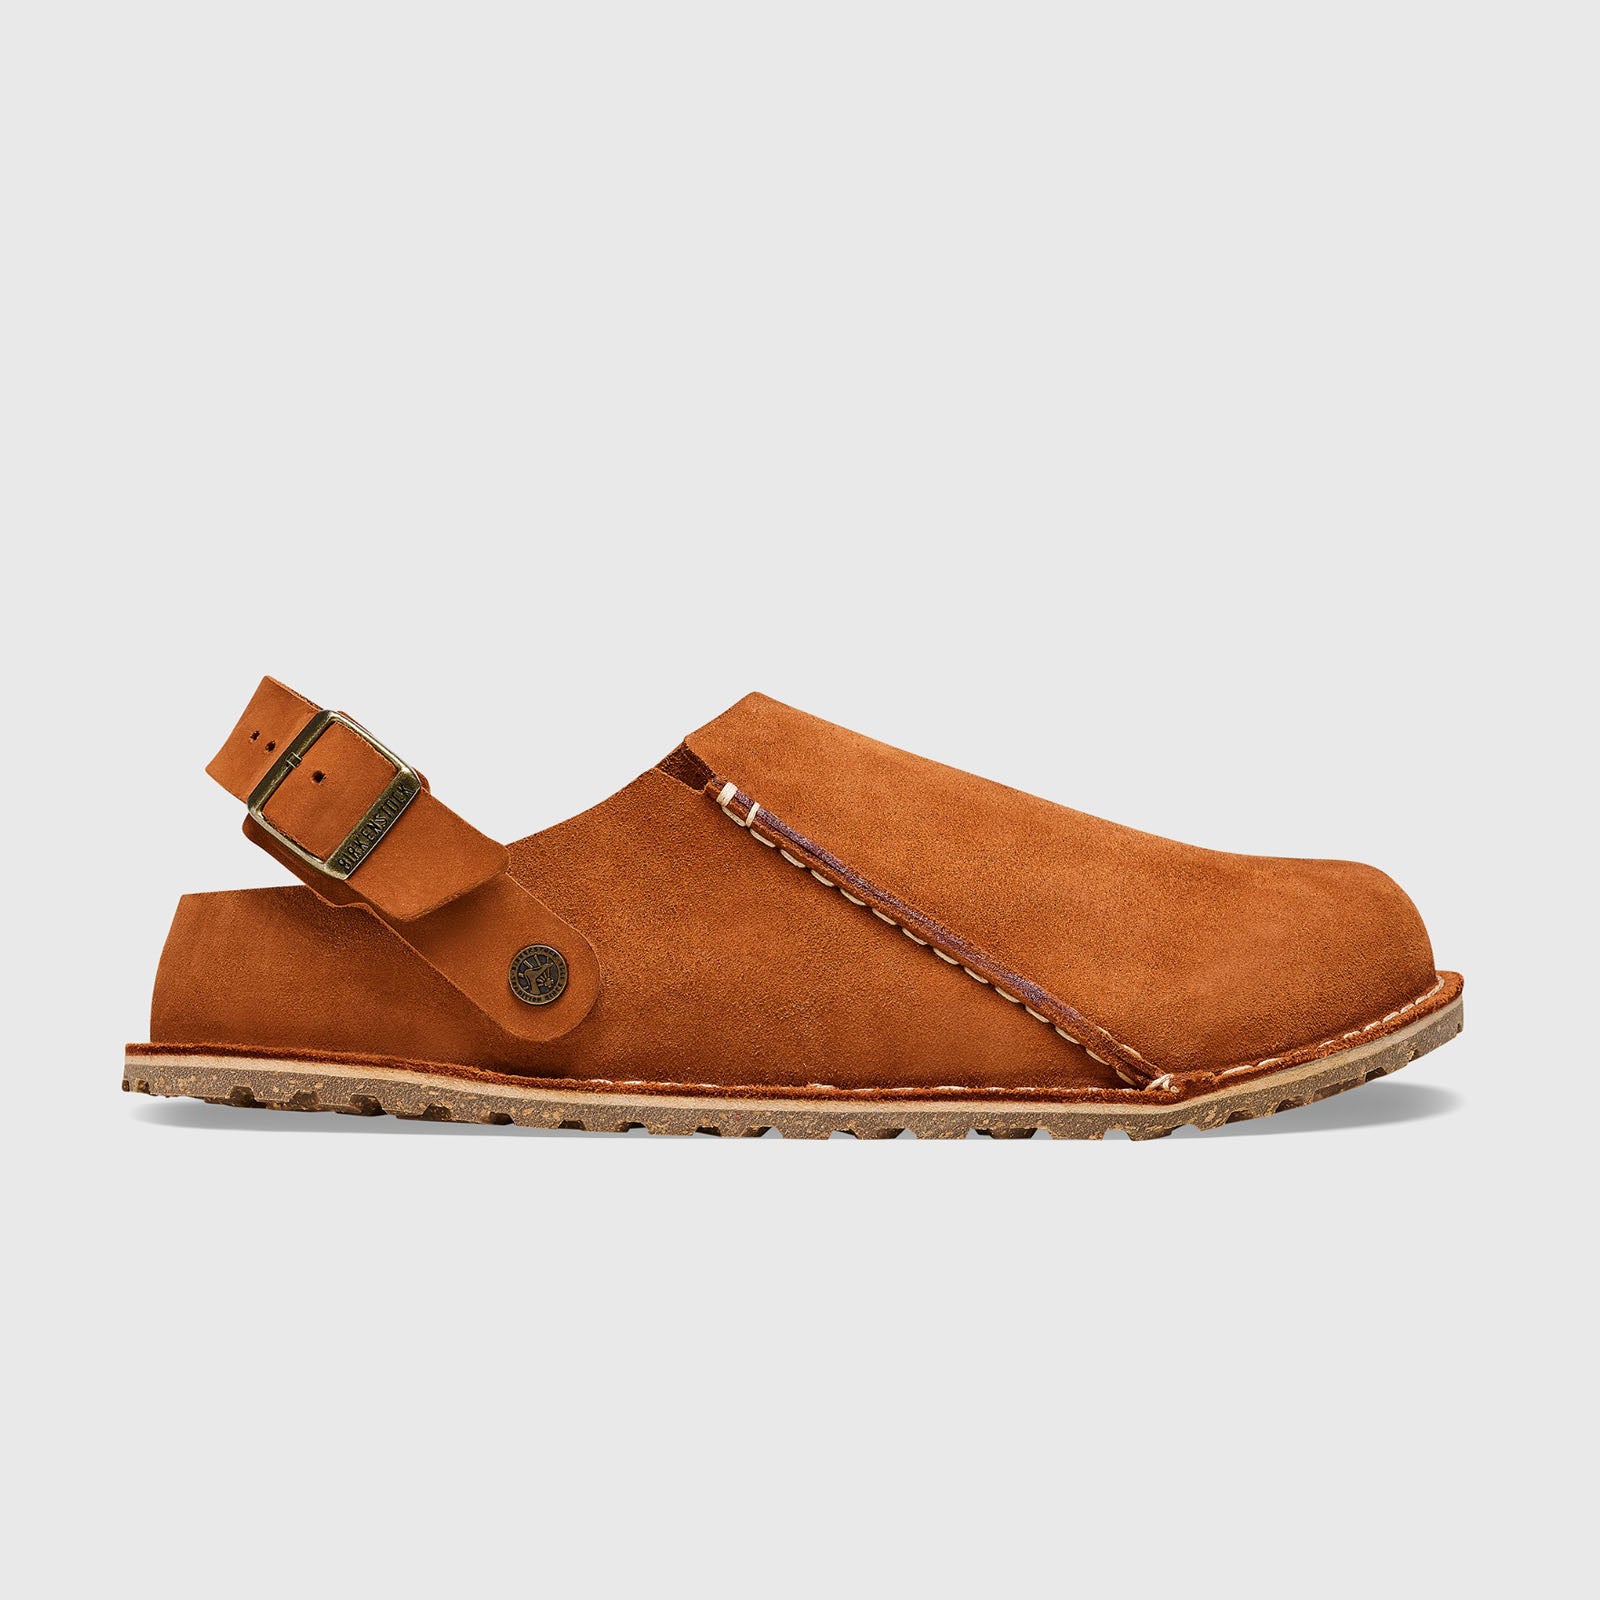 "Lutry Premium, Mink Suede Tobacco, in Brown Leather for Women" - 6